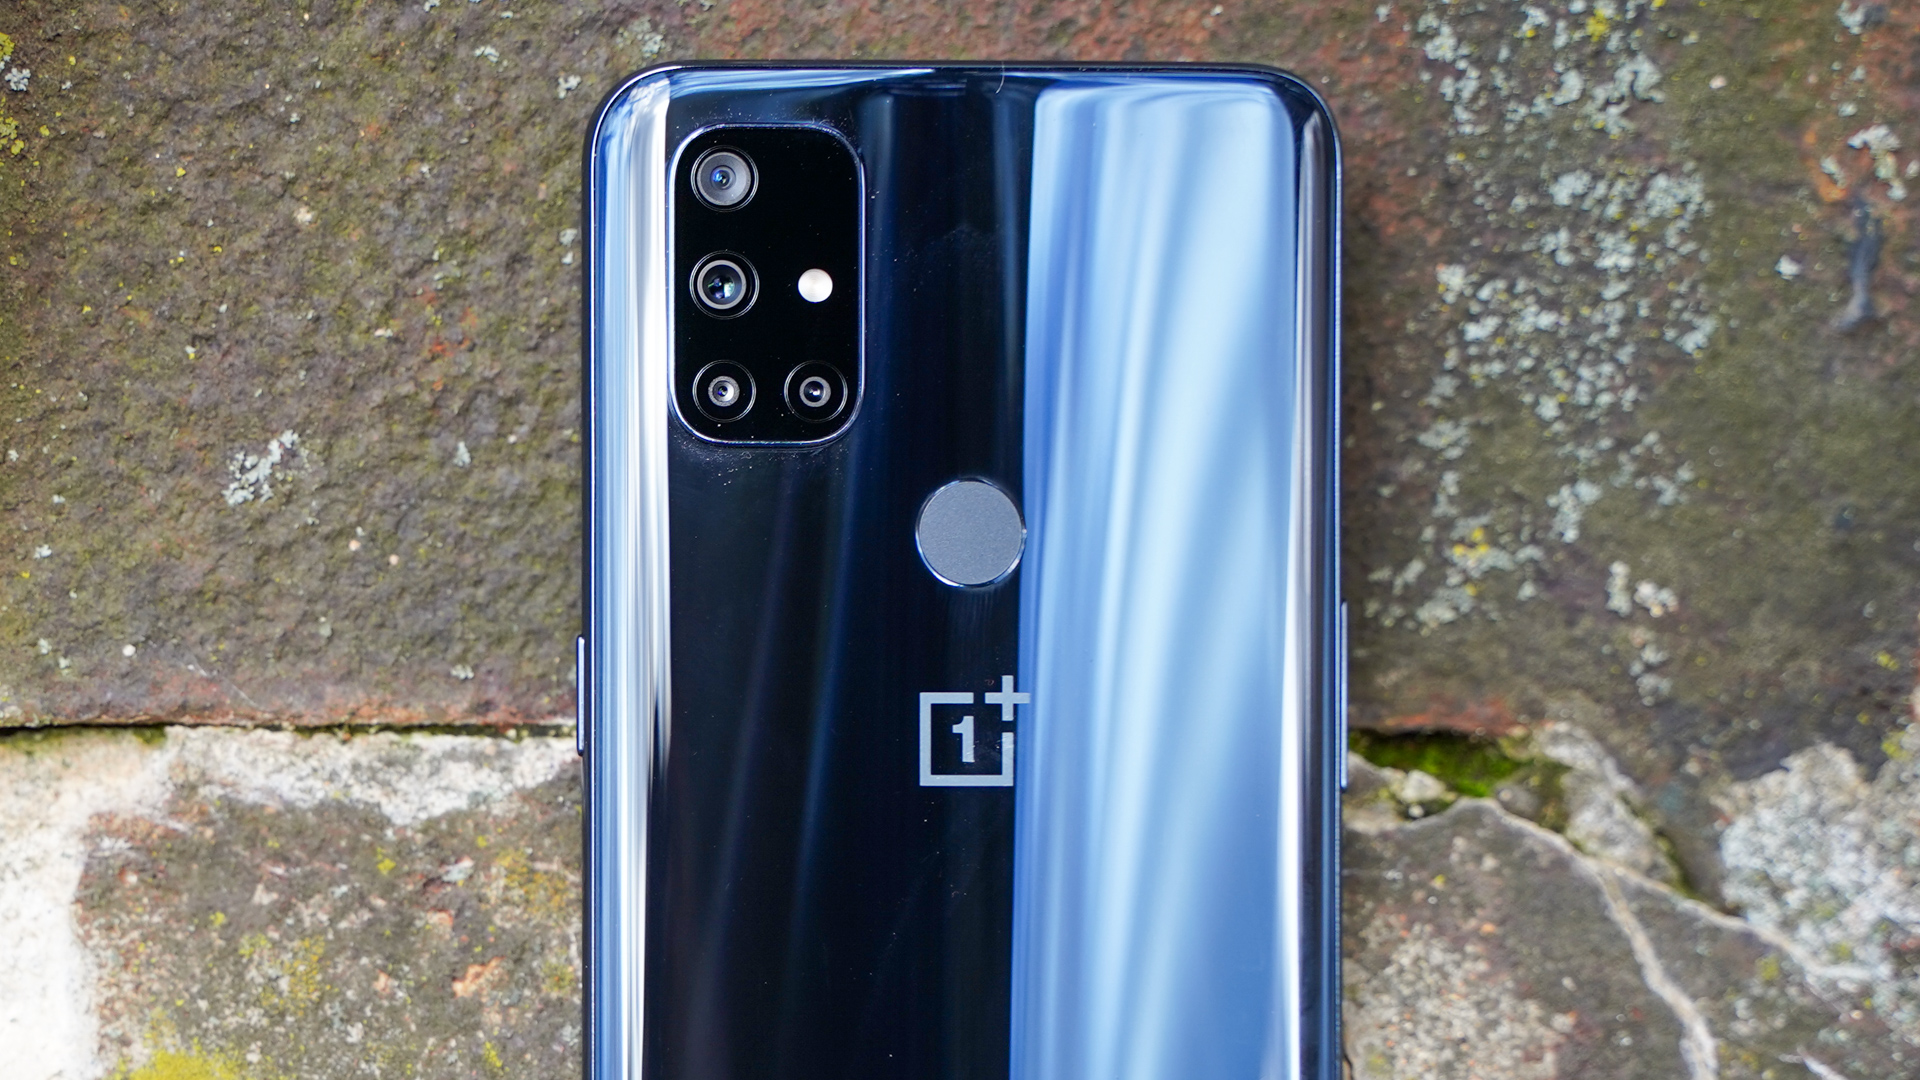 OnePlus Nord N10 camera module - OnePlus Nord N10 5G price in Nigeria and full specs